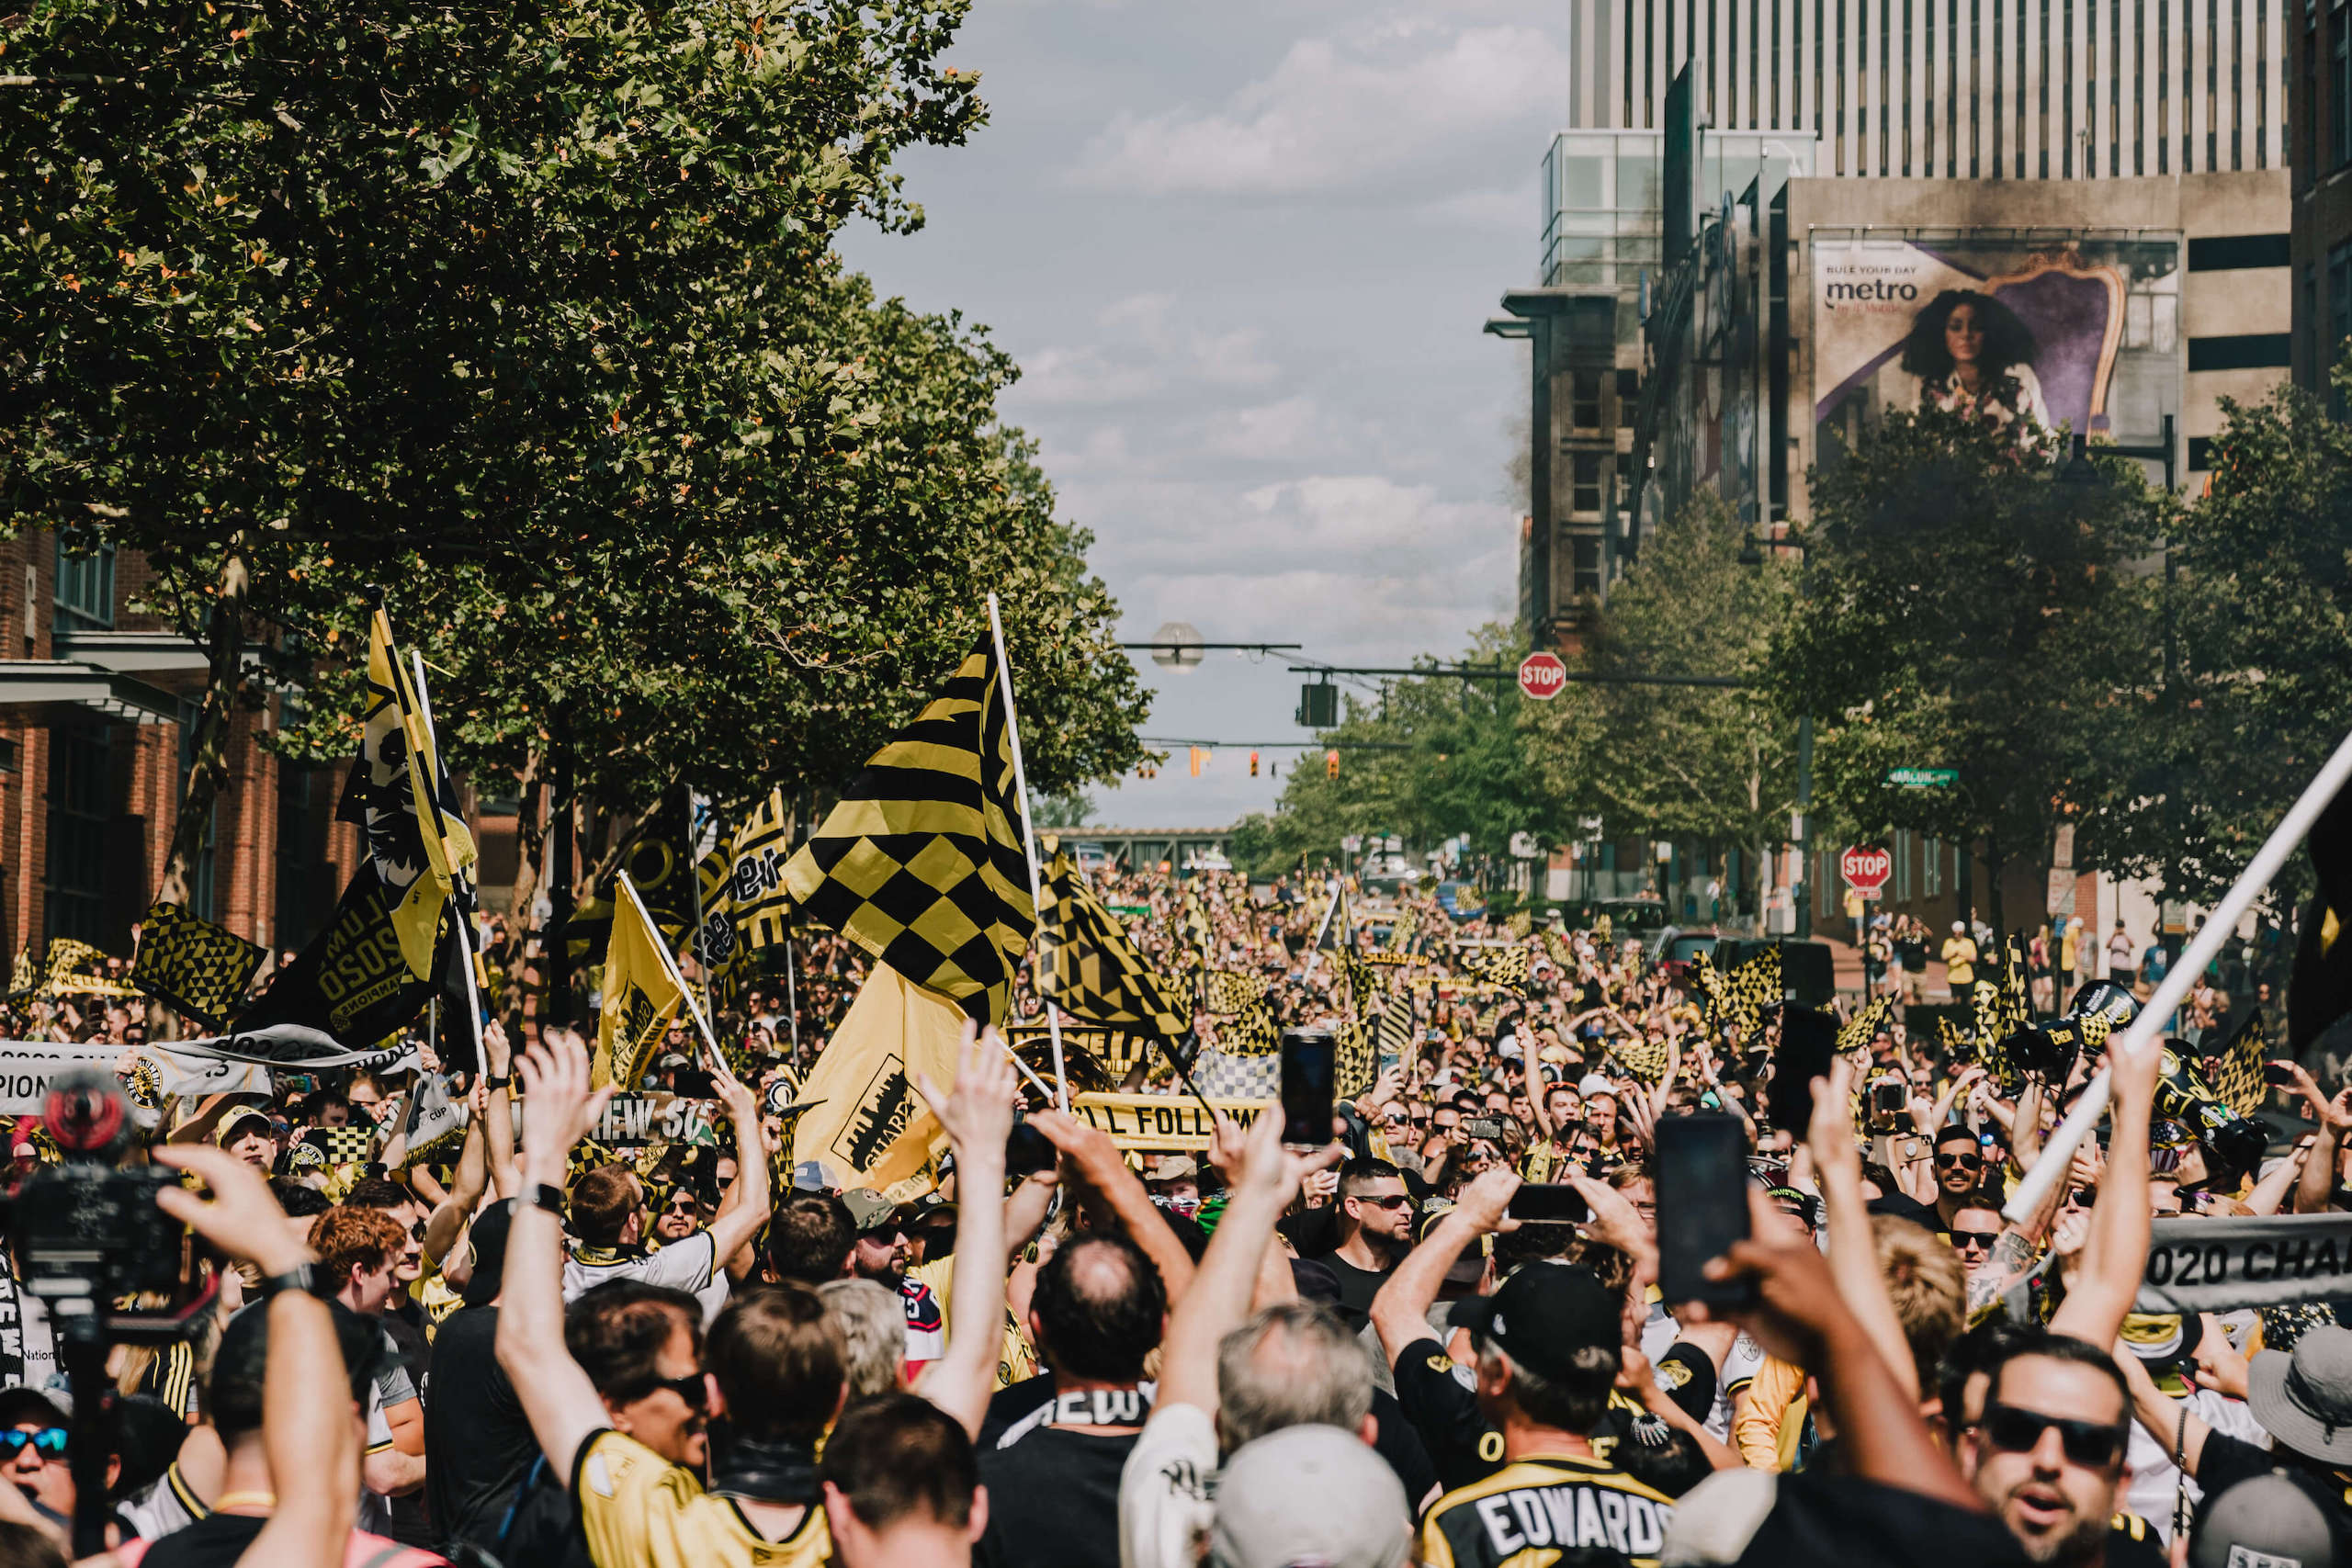 Crew View: Your guide to the Crew's new stadium